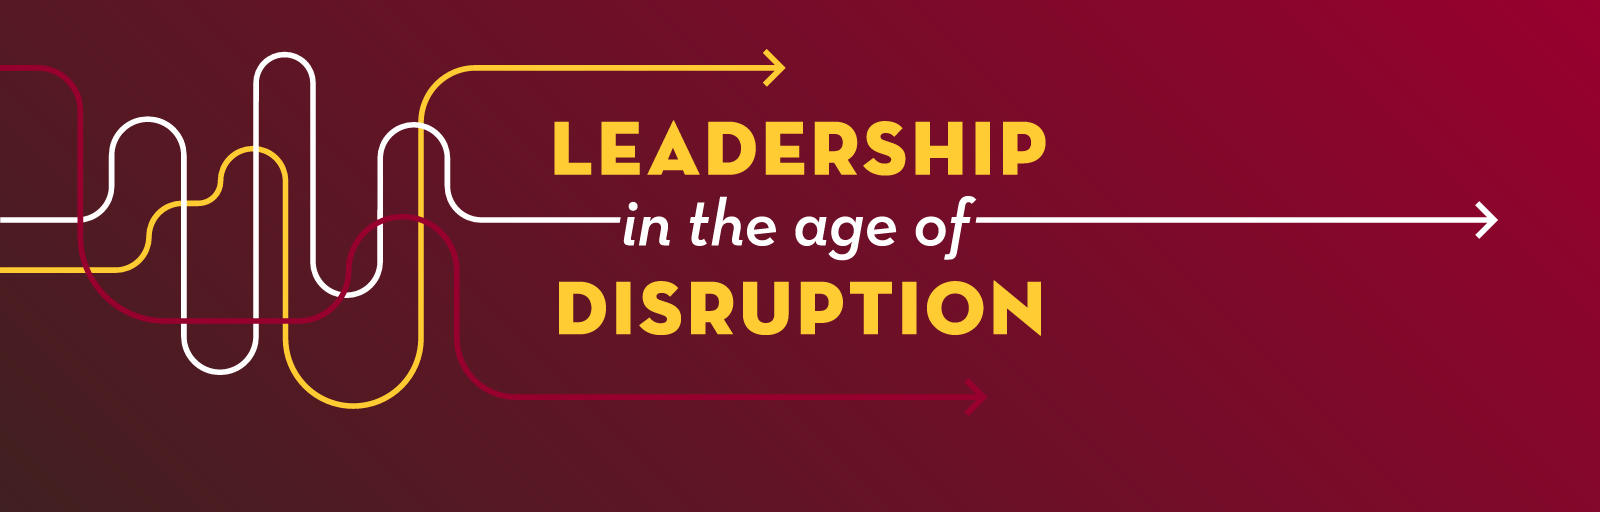 Leadership in Age of Disruption Banner